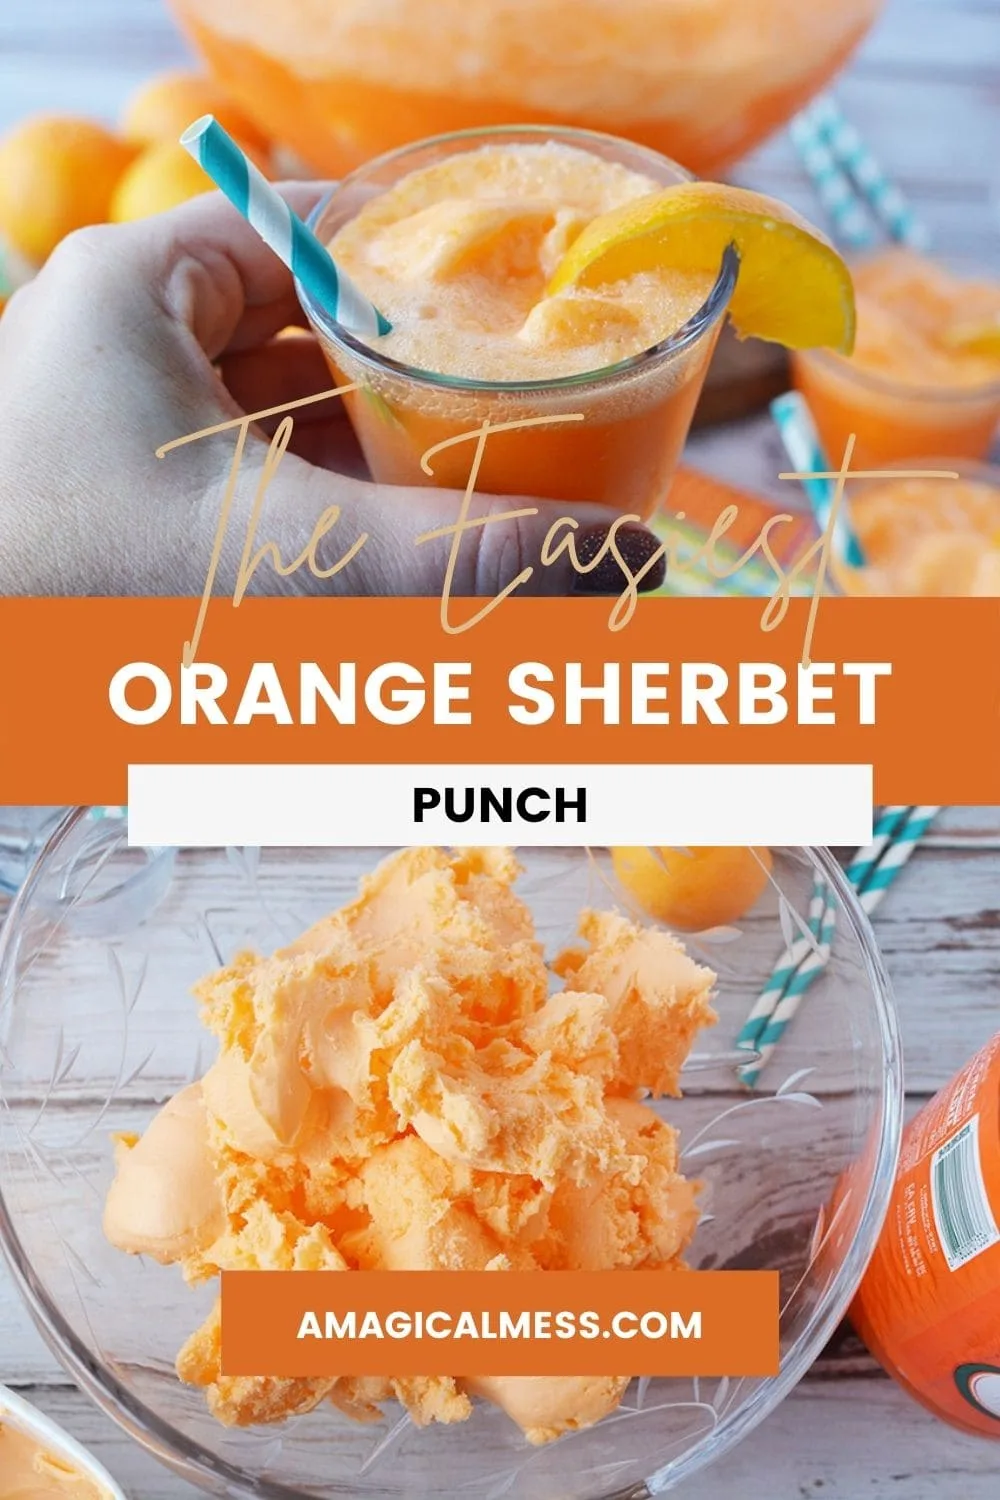 Holding a glass of orange punch and bowl full of orange sherbet.